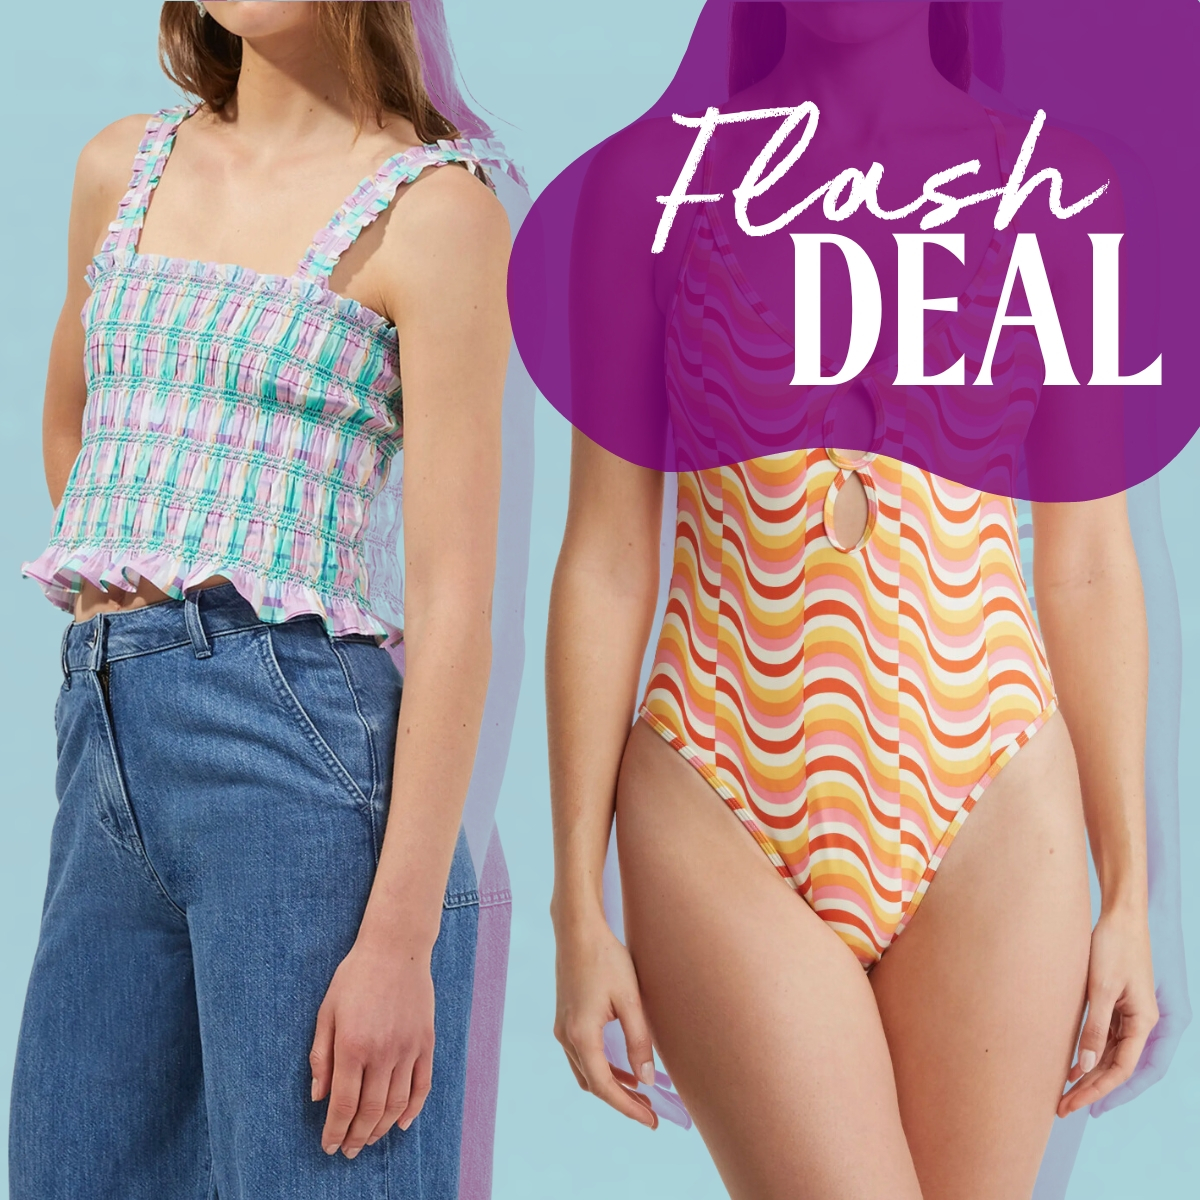 Nordstrom Rack’s Clear The Rack Sale Has $3 Tops & More Up to 93% Off